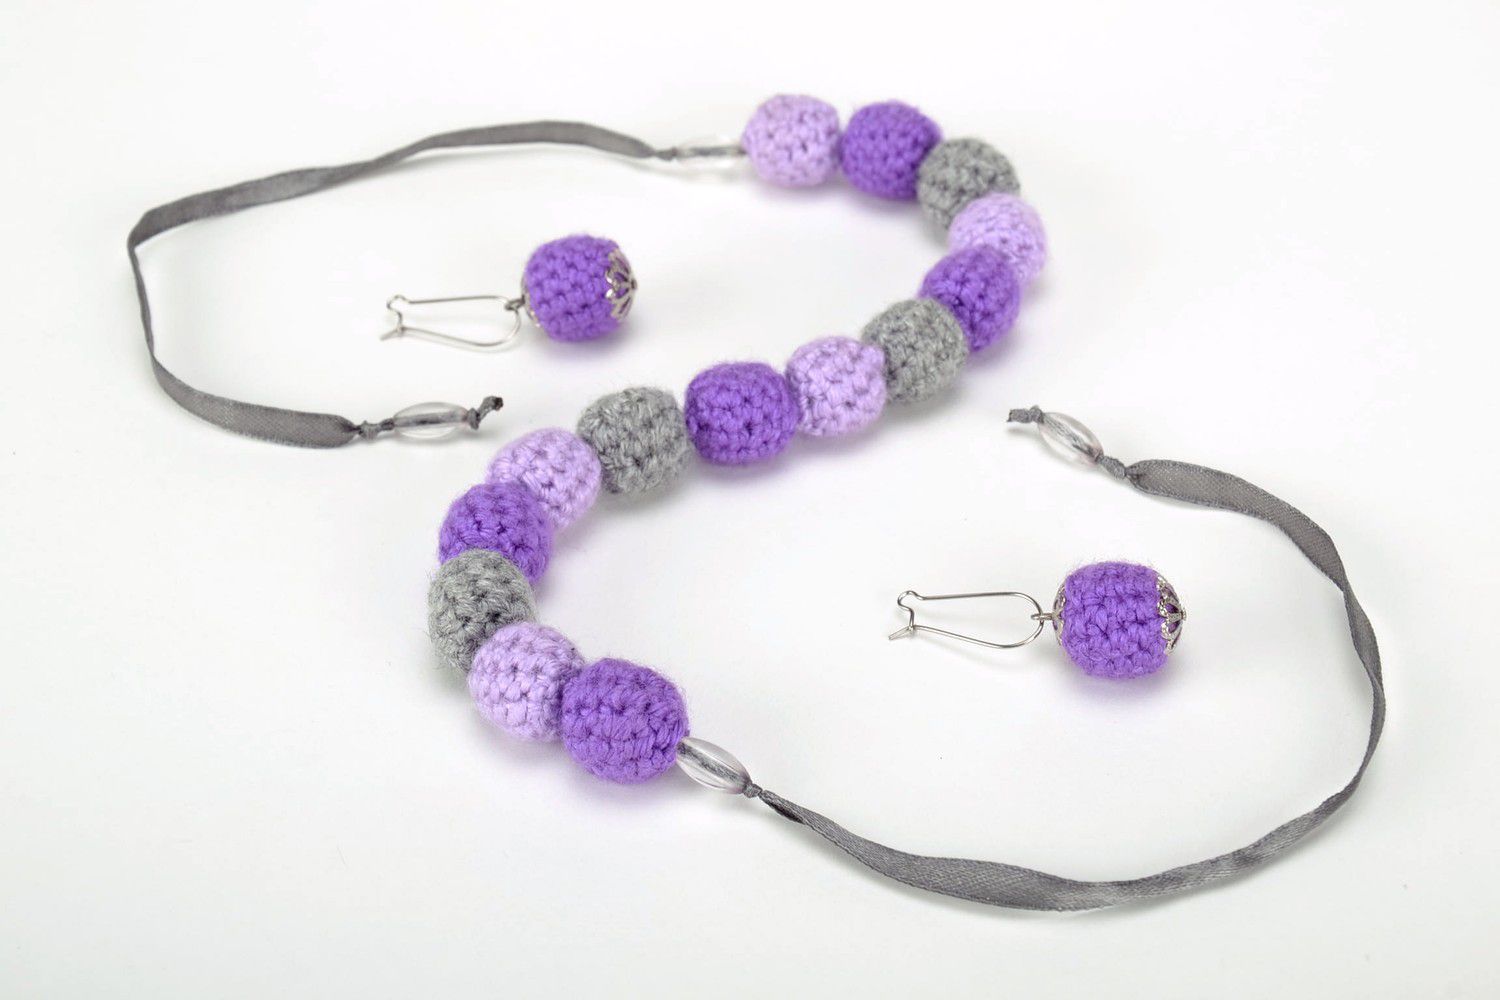 Jewelry set of beads and earrings photo 3